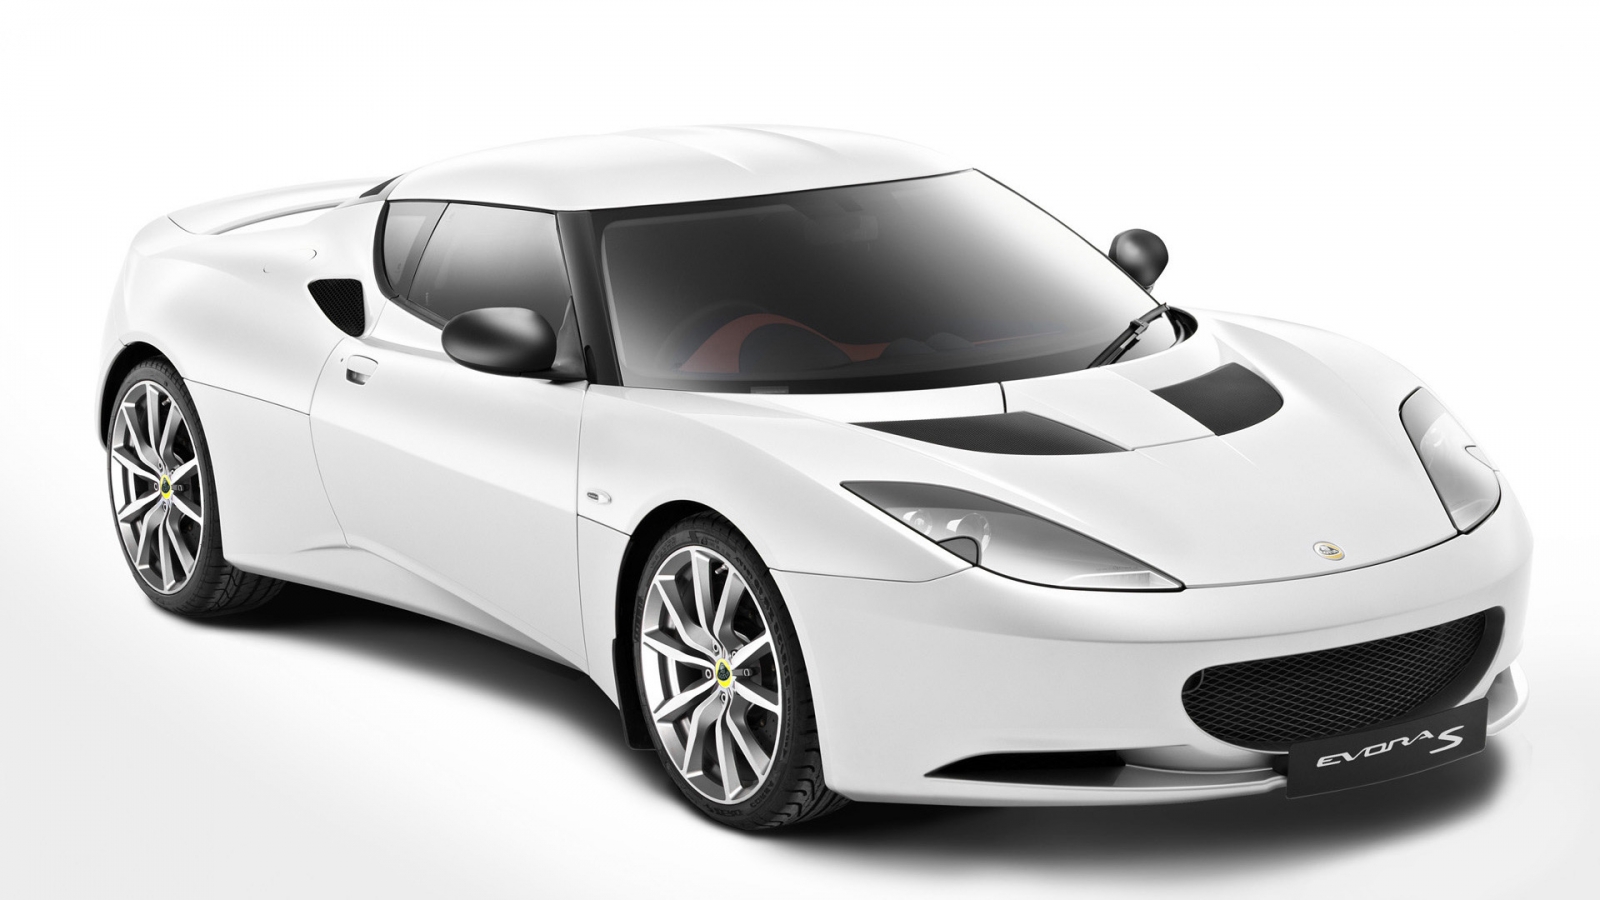 Lotus Evora S 2011 Front Angle for 1600 x 900 HDTV resolution